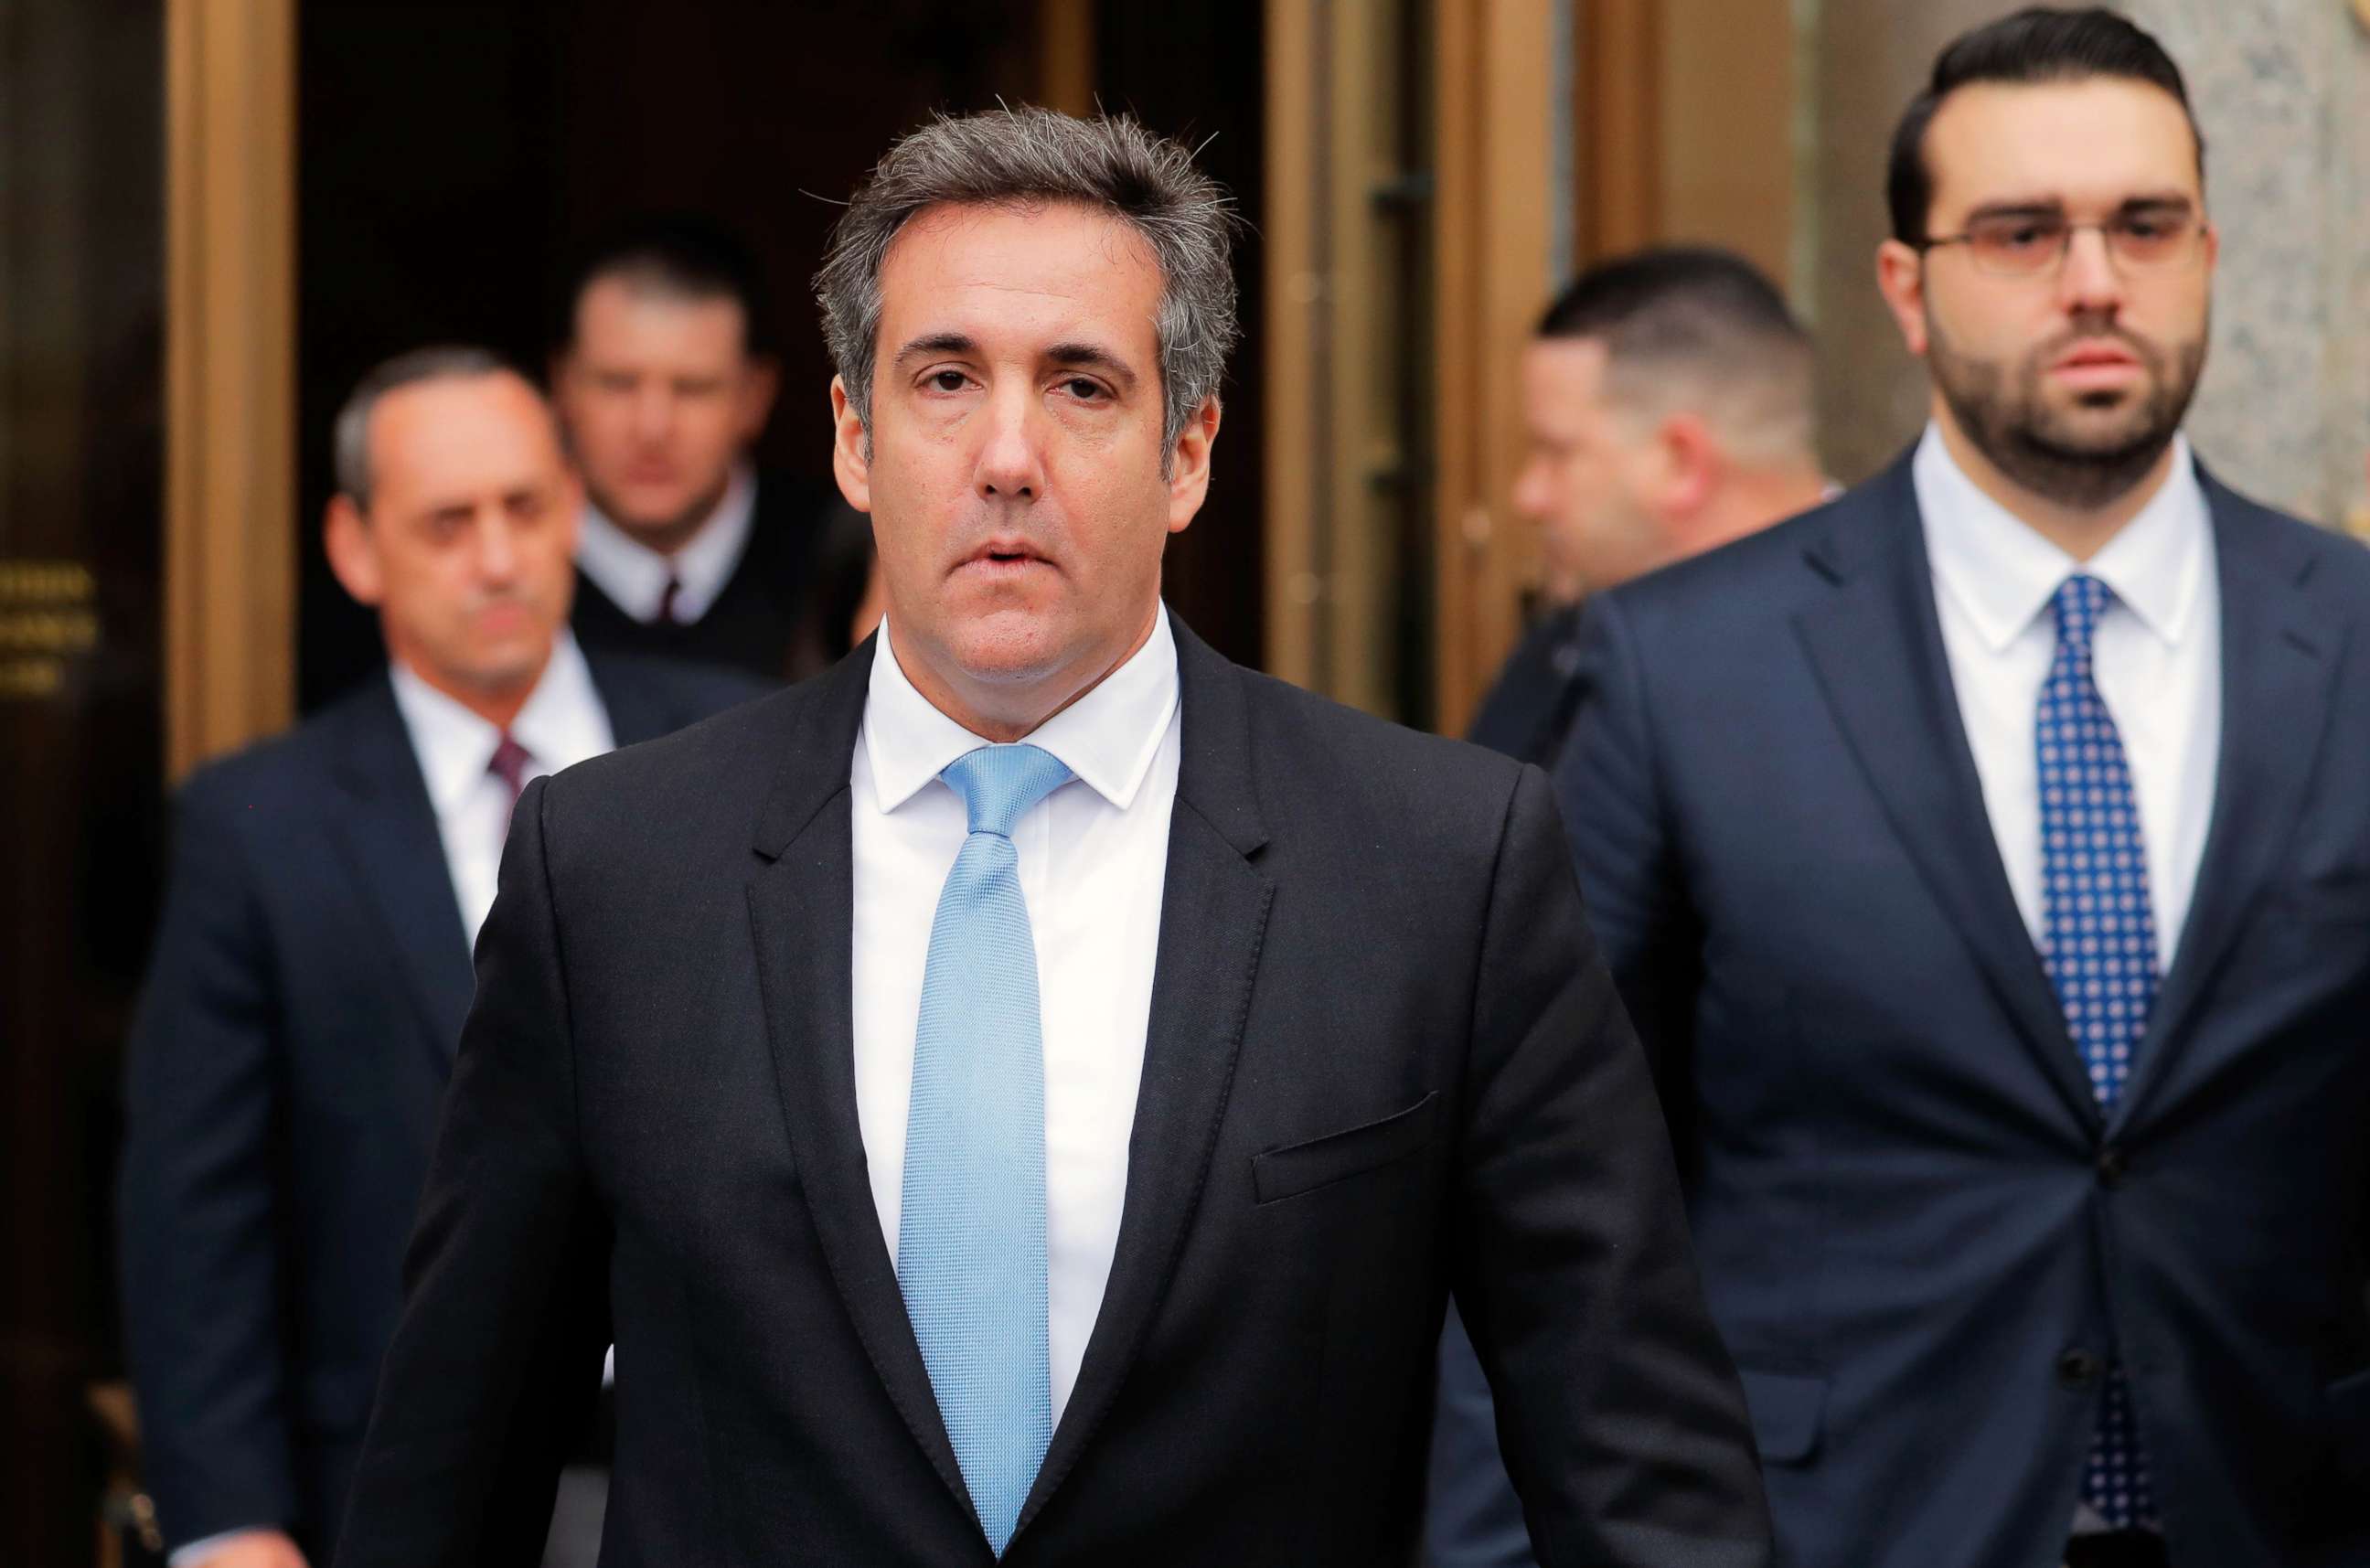 PHOTO: U.S. President Donald Trump's personal lawyer Michael Cohen leaves federal court in the Manhattan borough of New York City, New York, April 16, 2018.